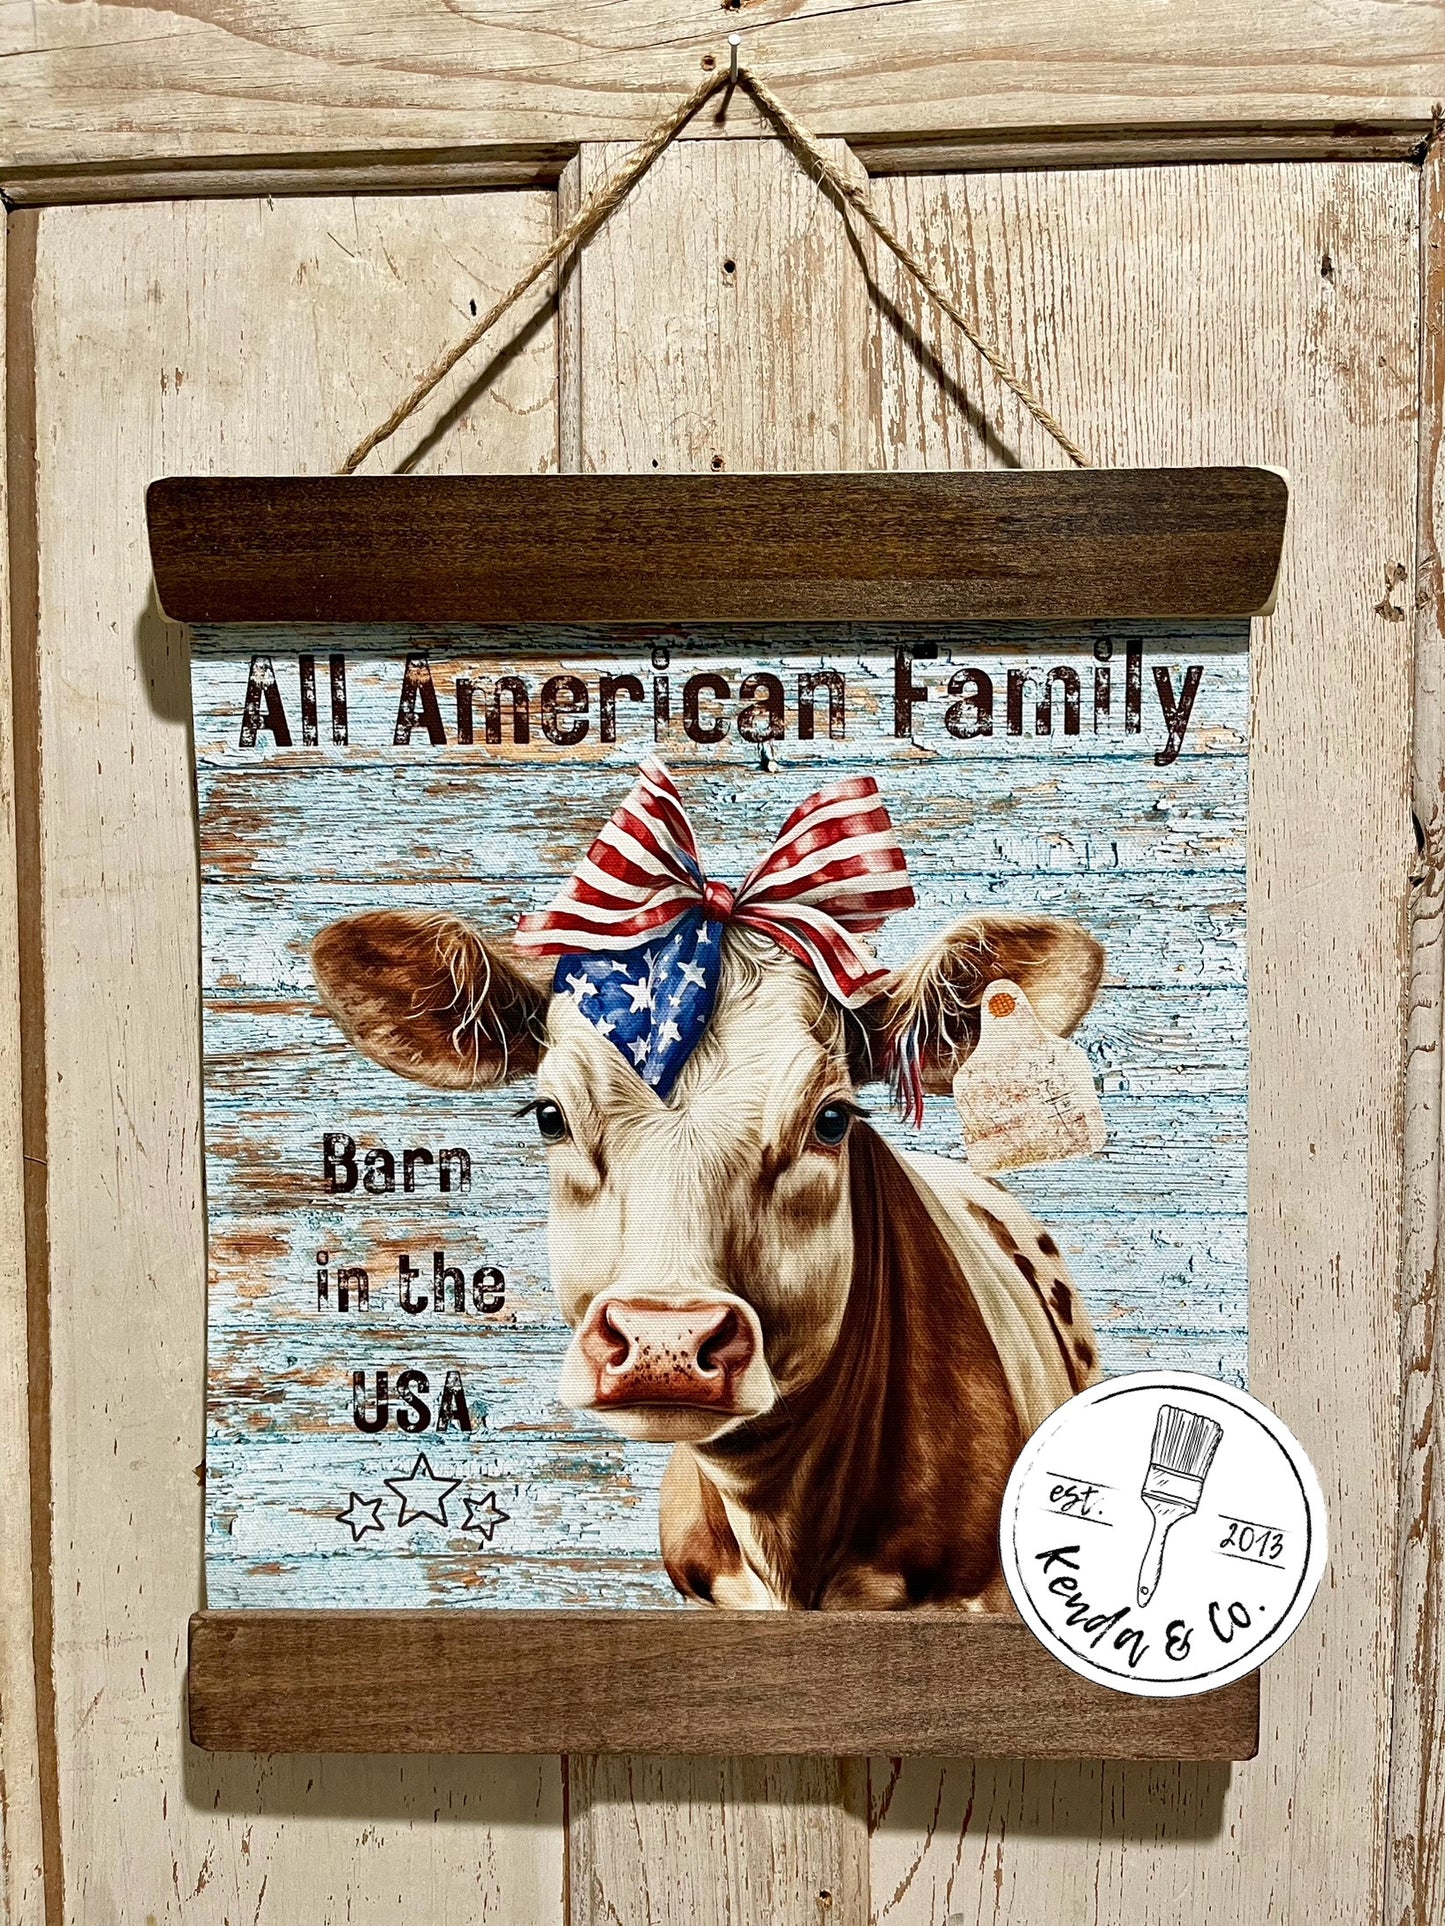 All American family cow w/ ear tag (small) tapestry